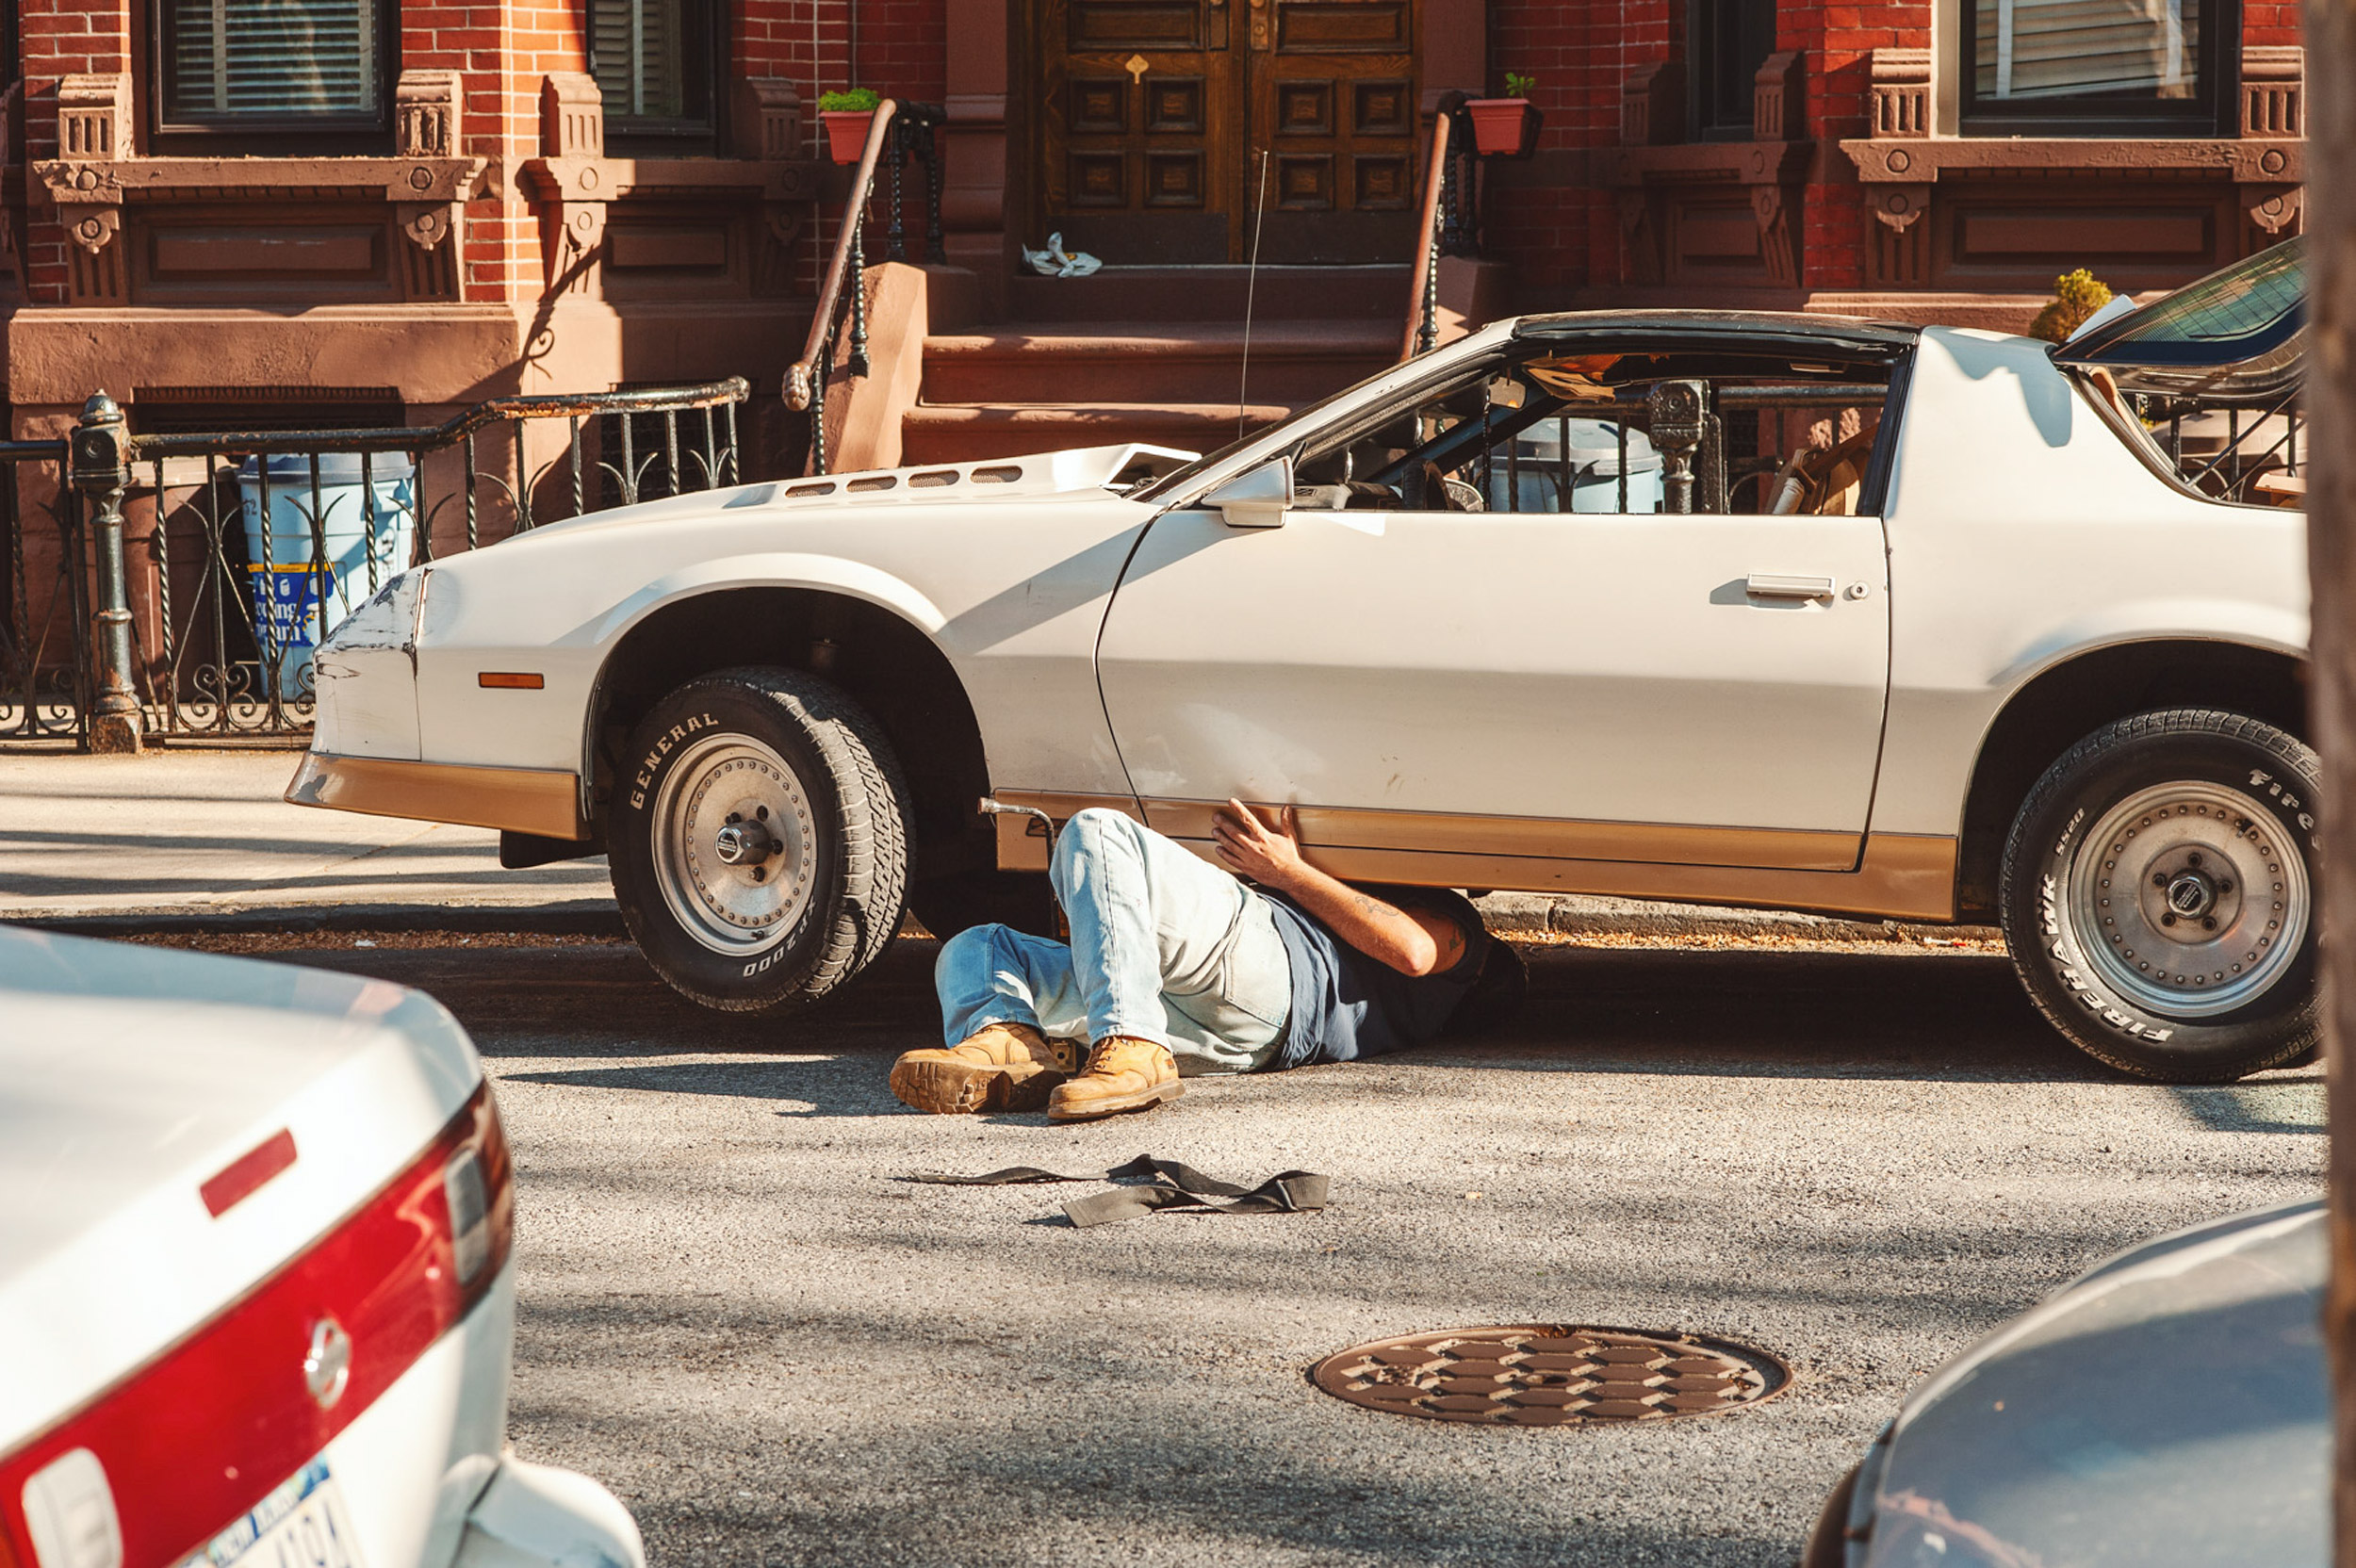 A-MECHANIC-UNDER-HIS-VINTAGE-SPORTS-CAR-IN-BROOKLYN-NEW-YORK